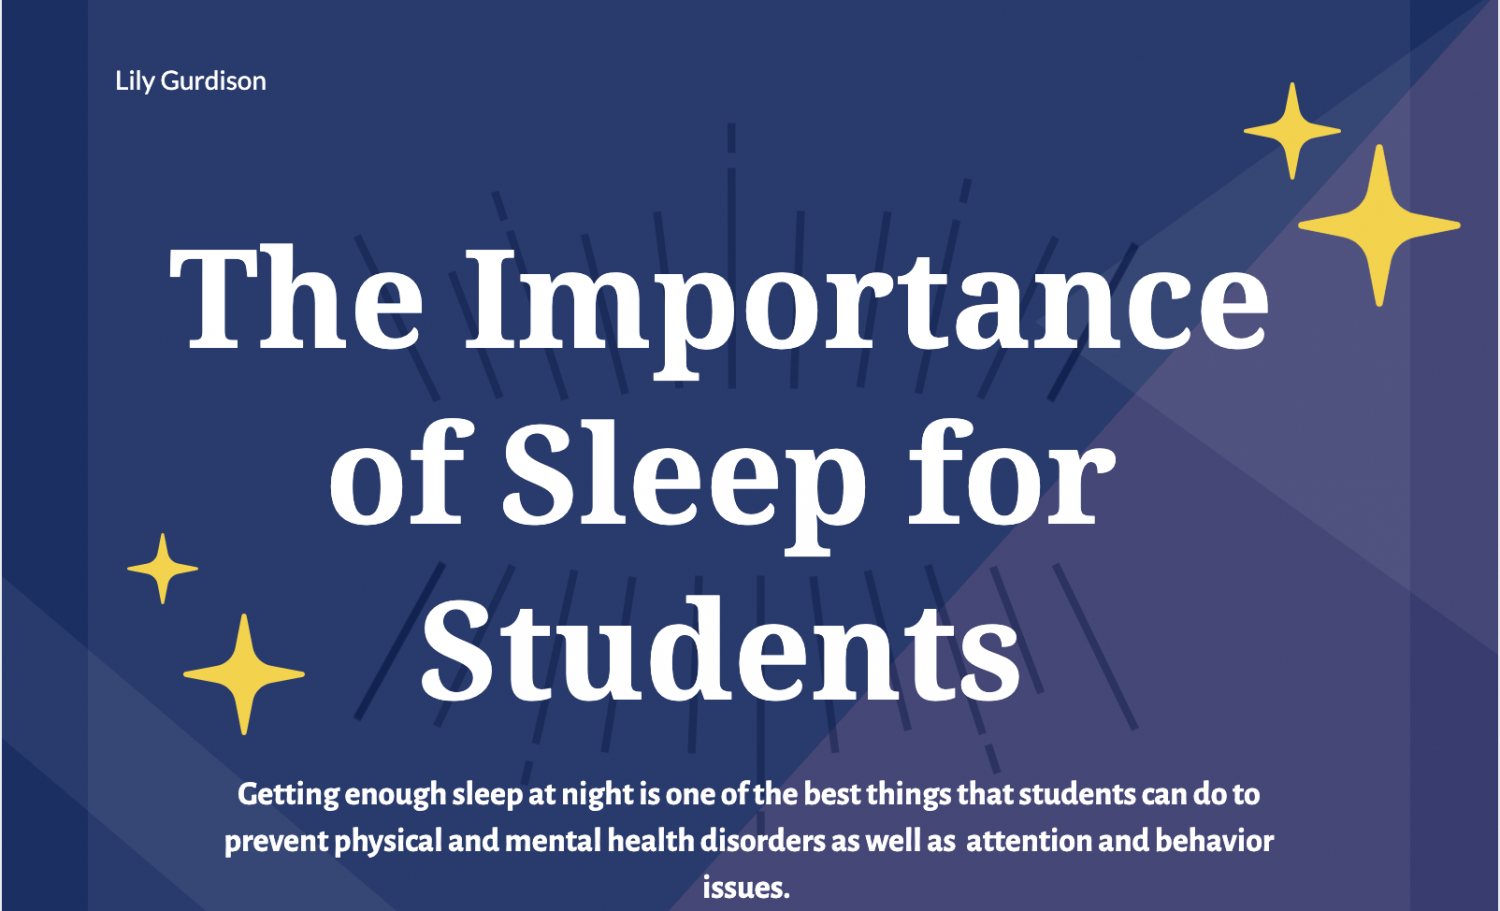 INFOGRAPHIC: The importance of sleep for students